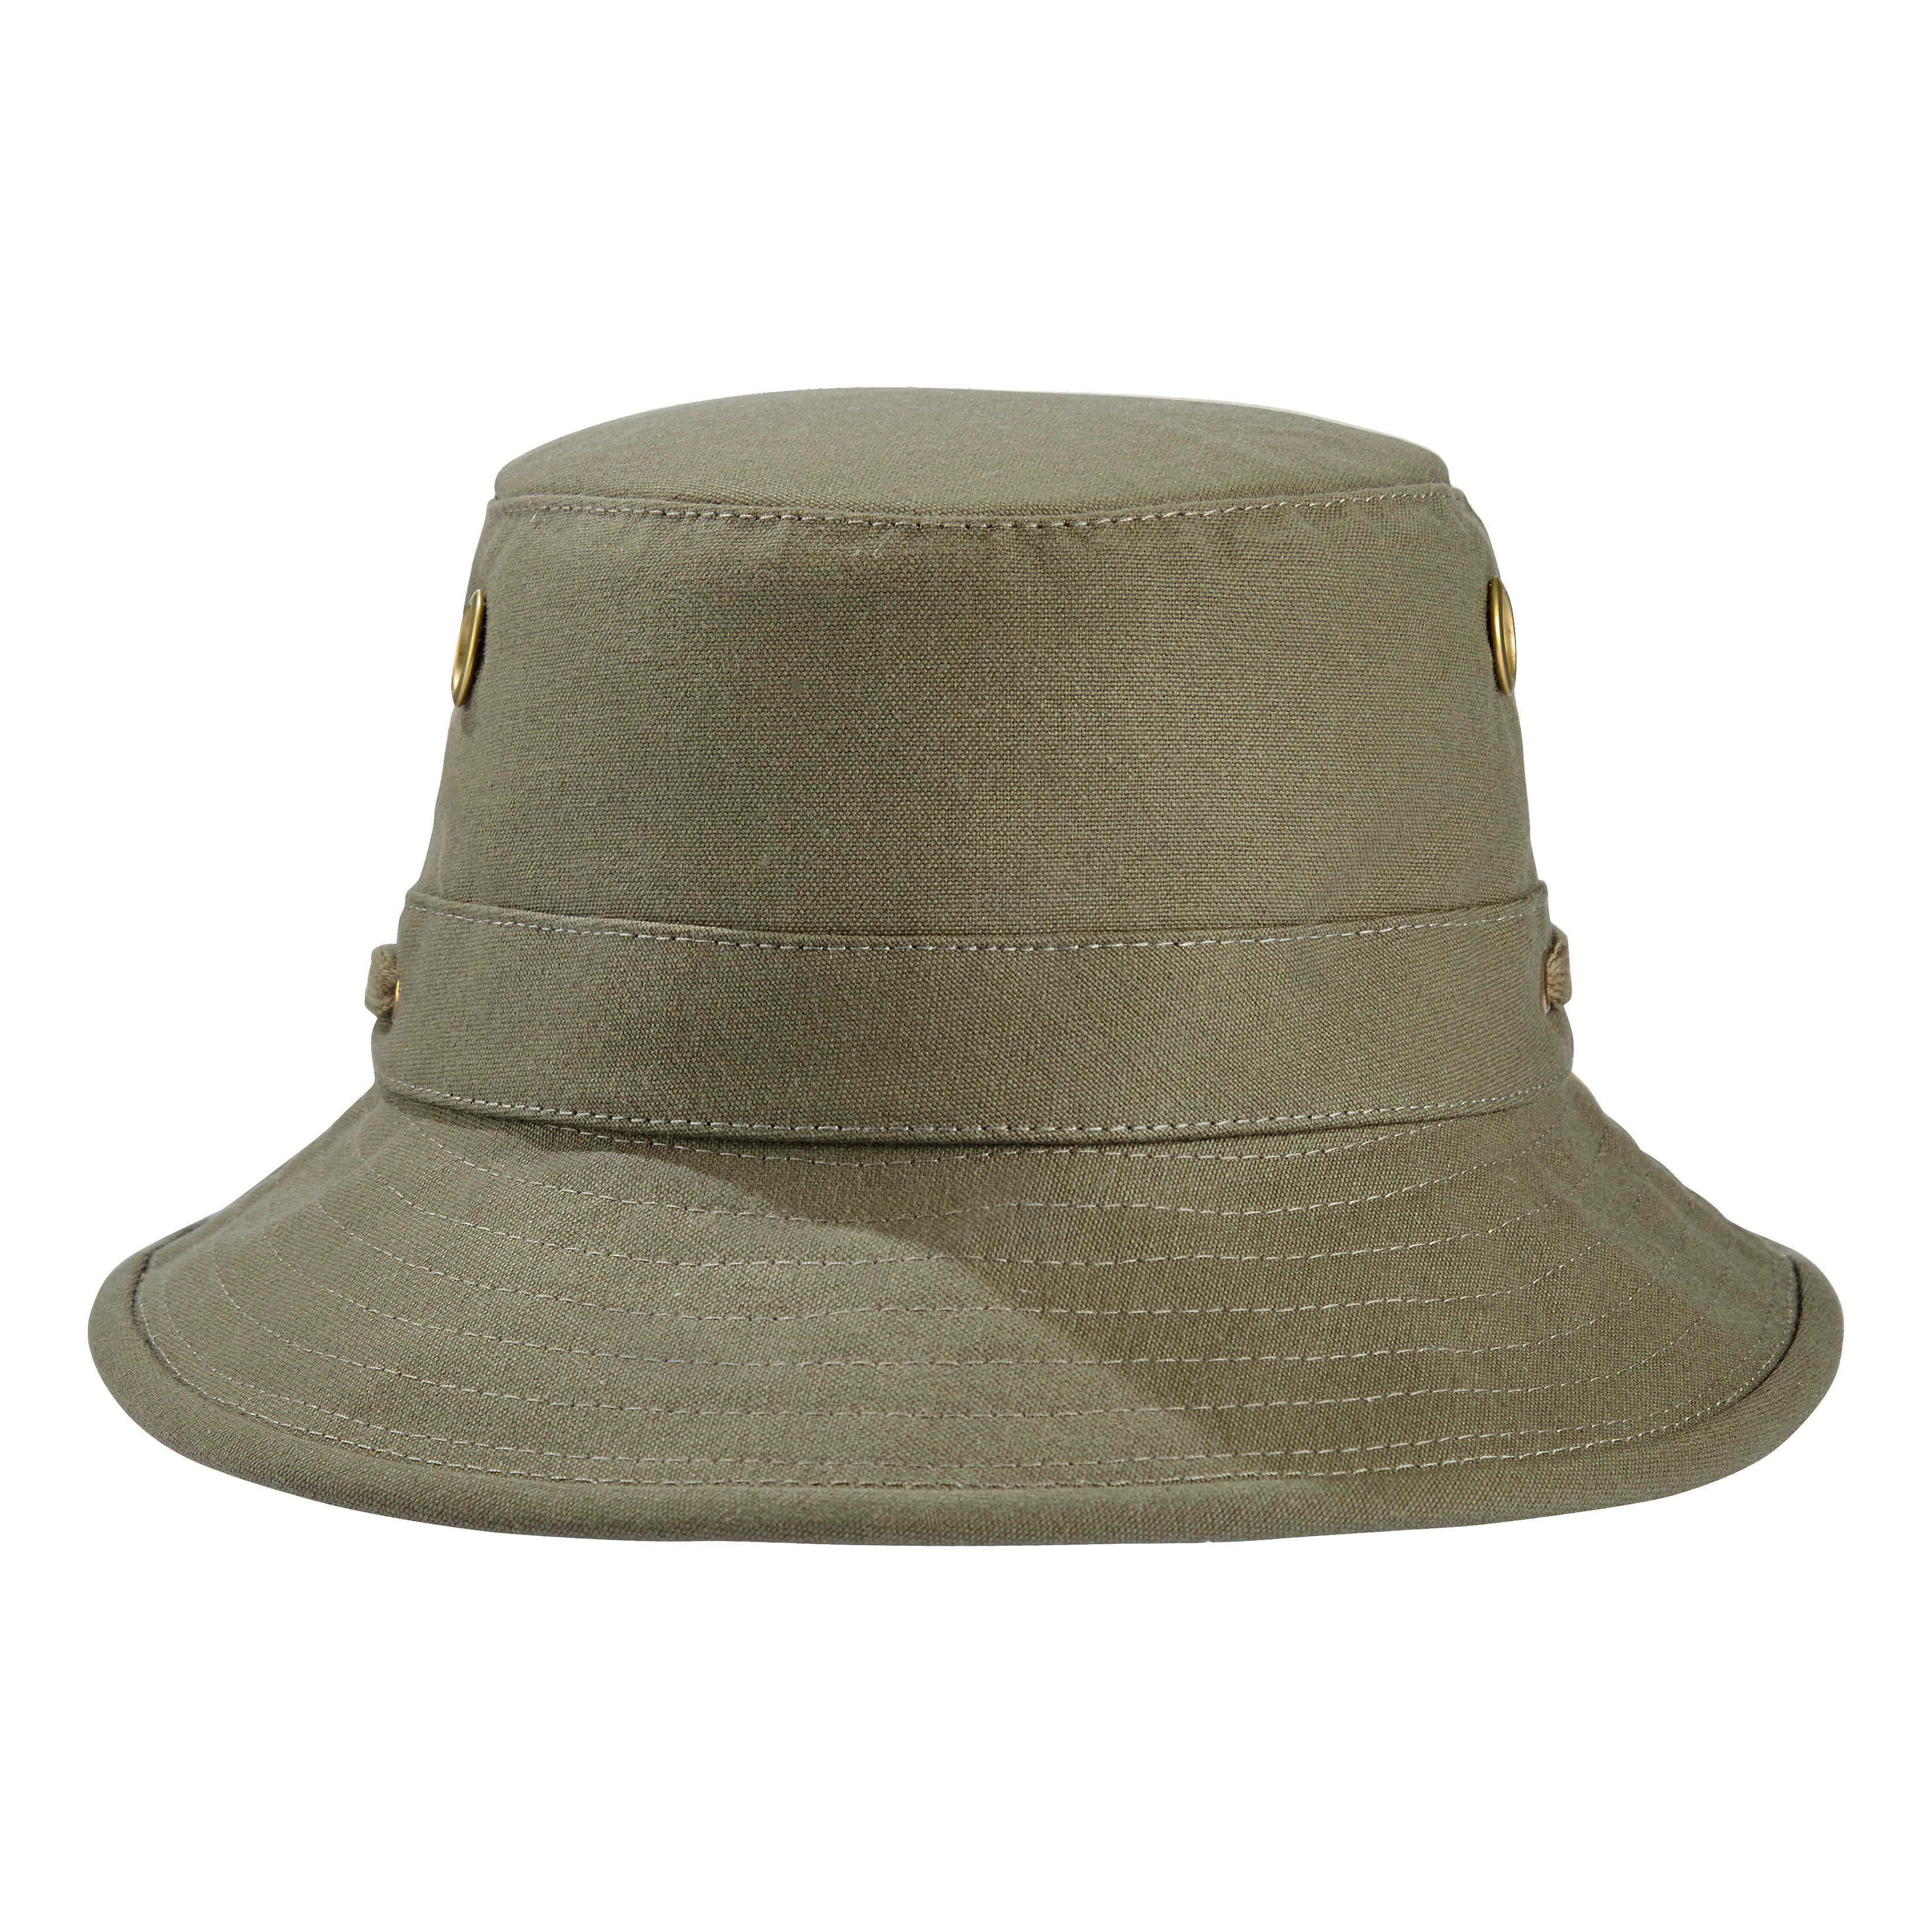 Tilley Iconic T1 Bucket Hat - Olive - 7 1/2